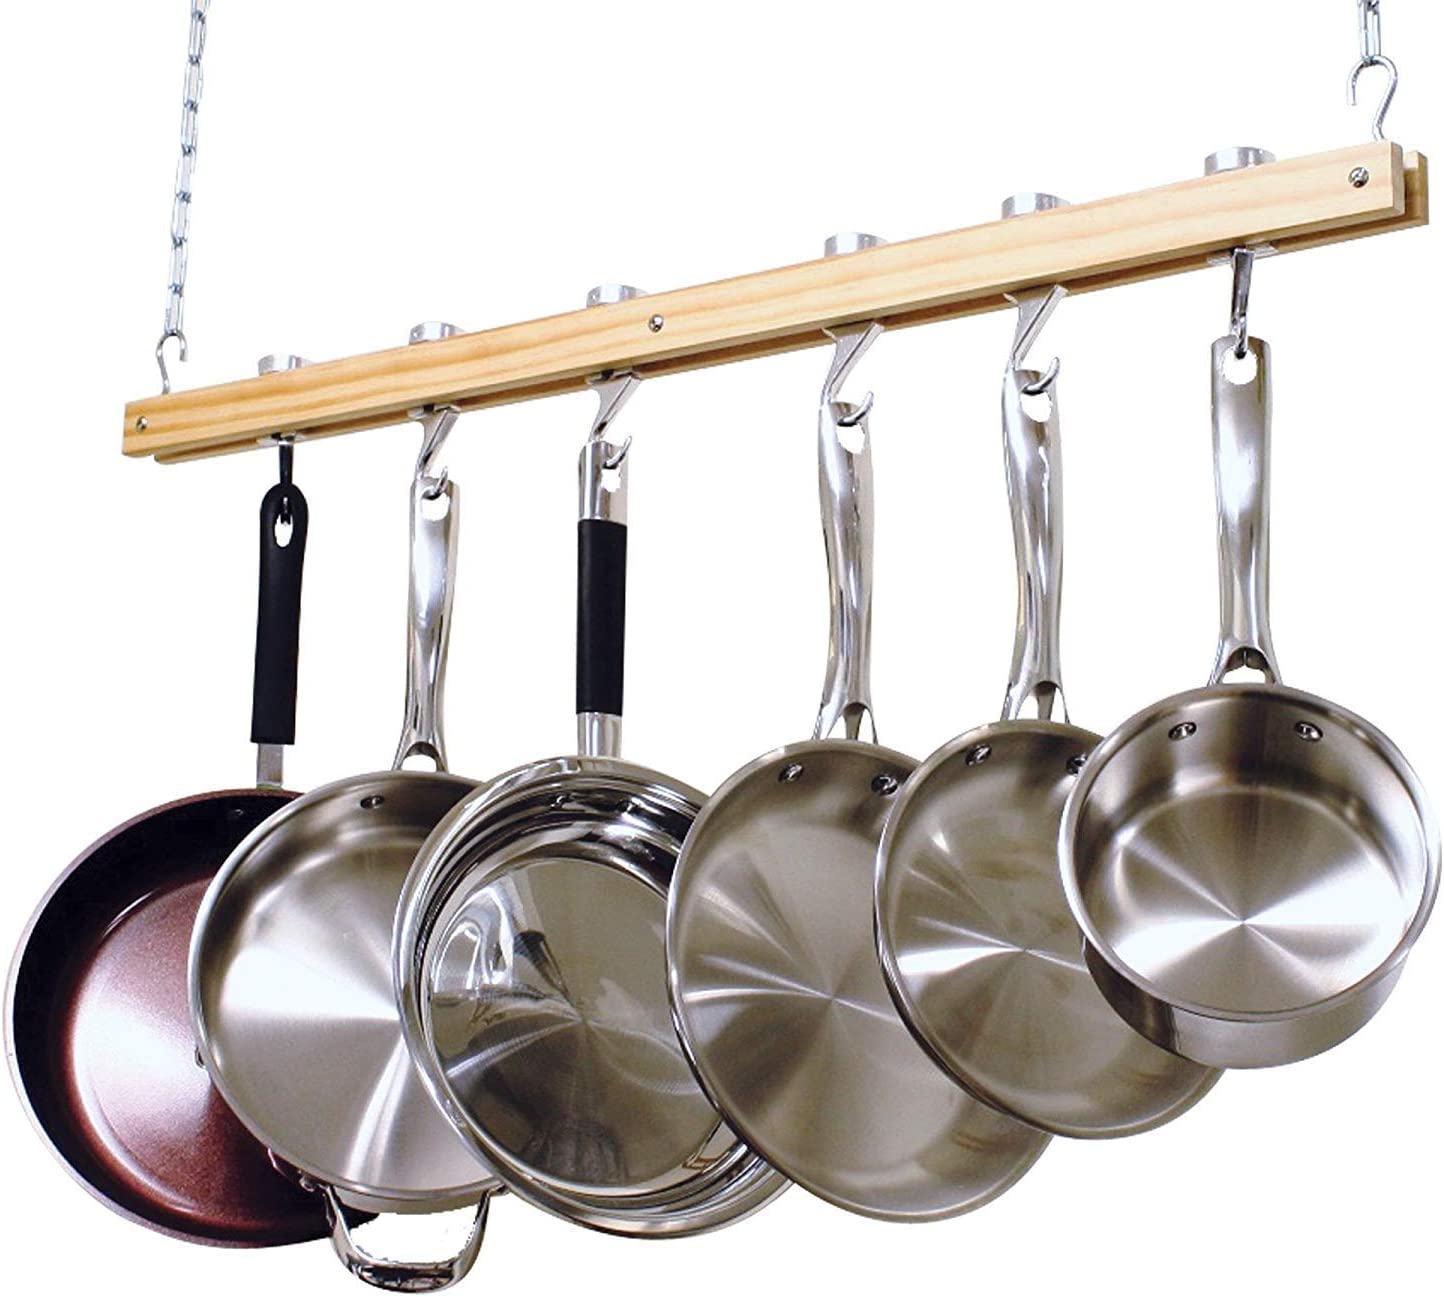 11 Best Pots and Pans Organizers to Maximize Your Space 2023